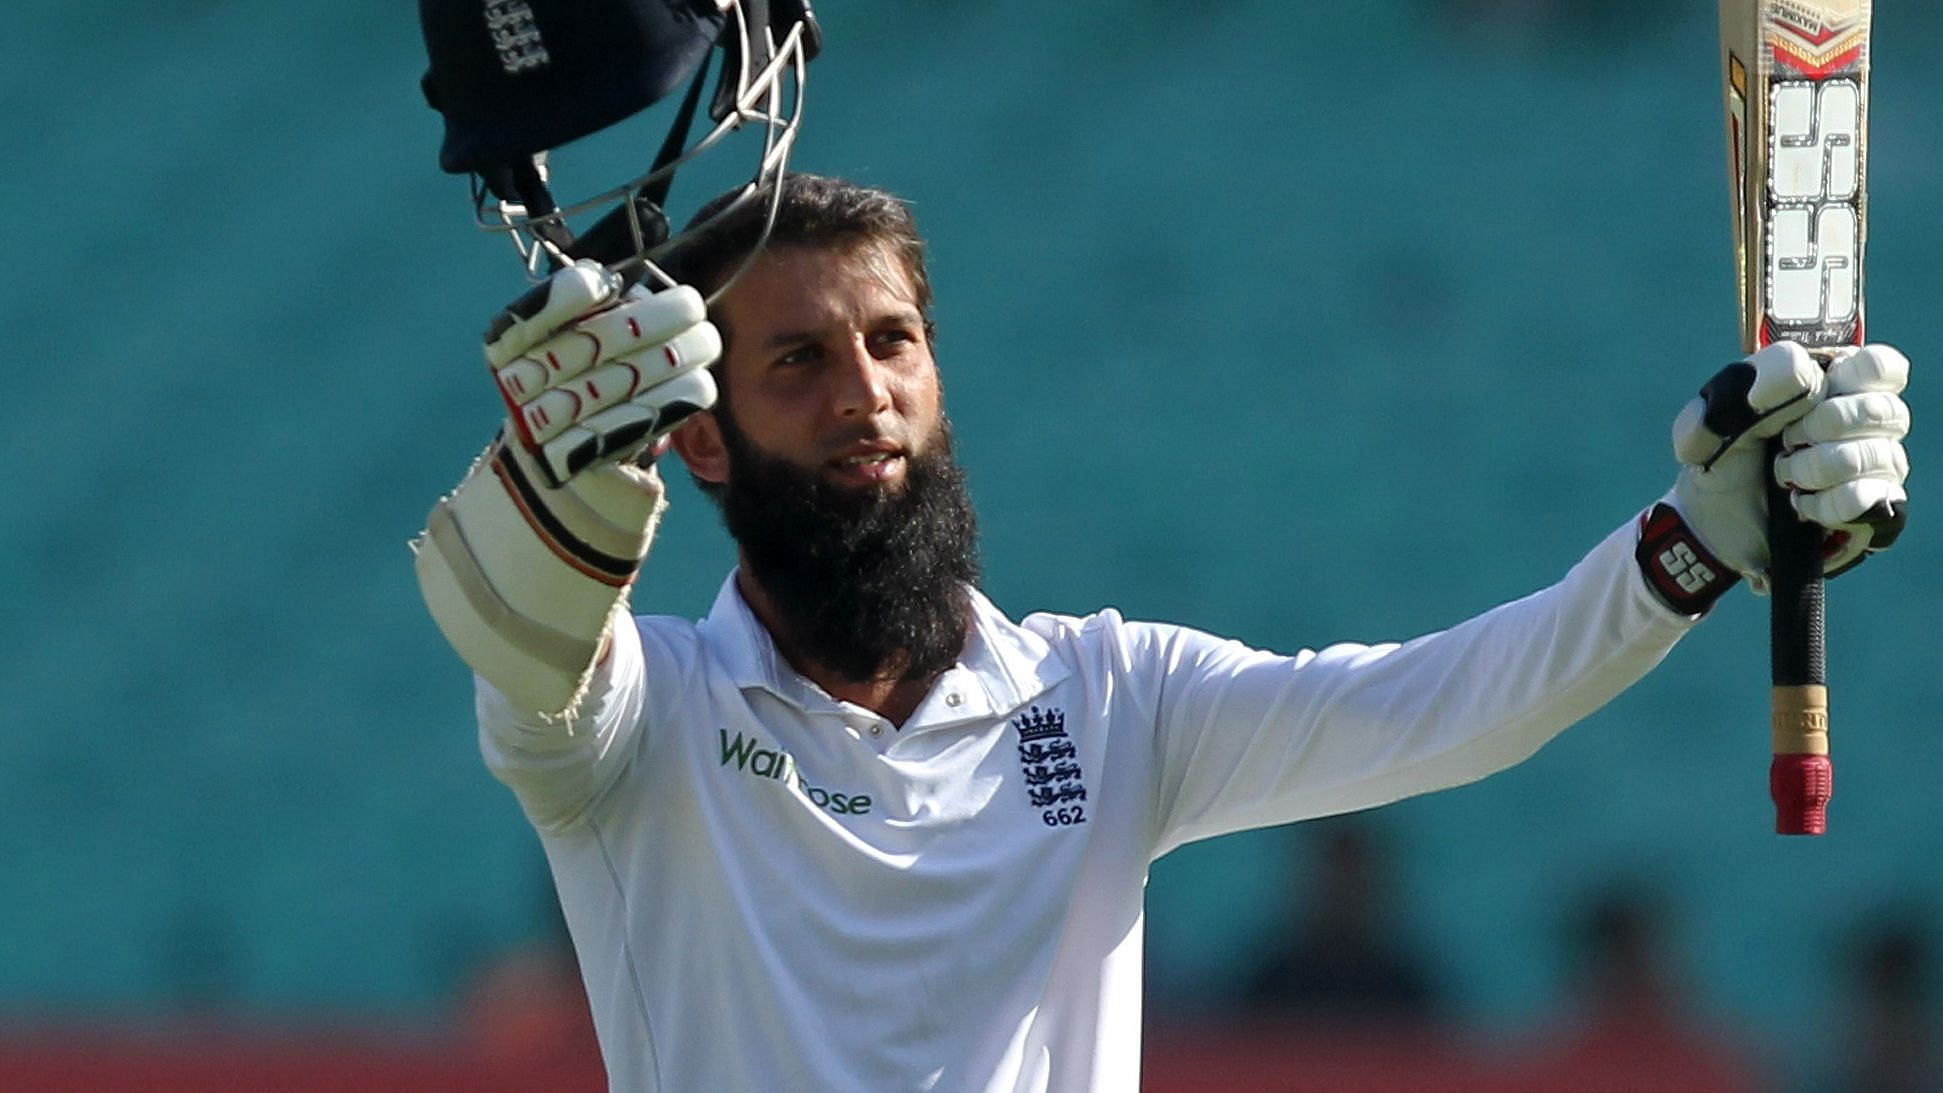 England all-rounder Moeen Ali has tested positive for COVID-19 upon arrival with the English cricket team in Sri Lanka.